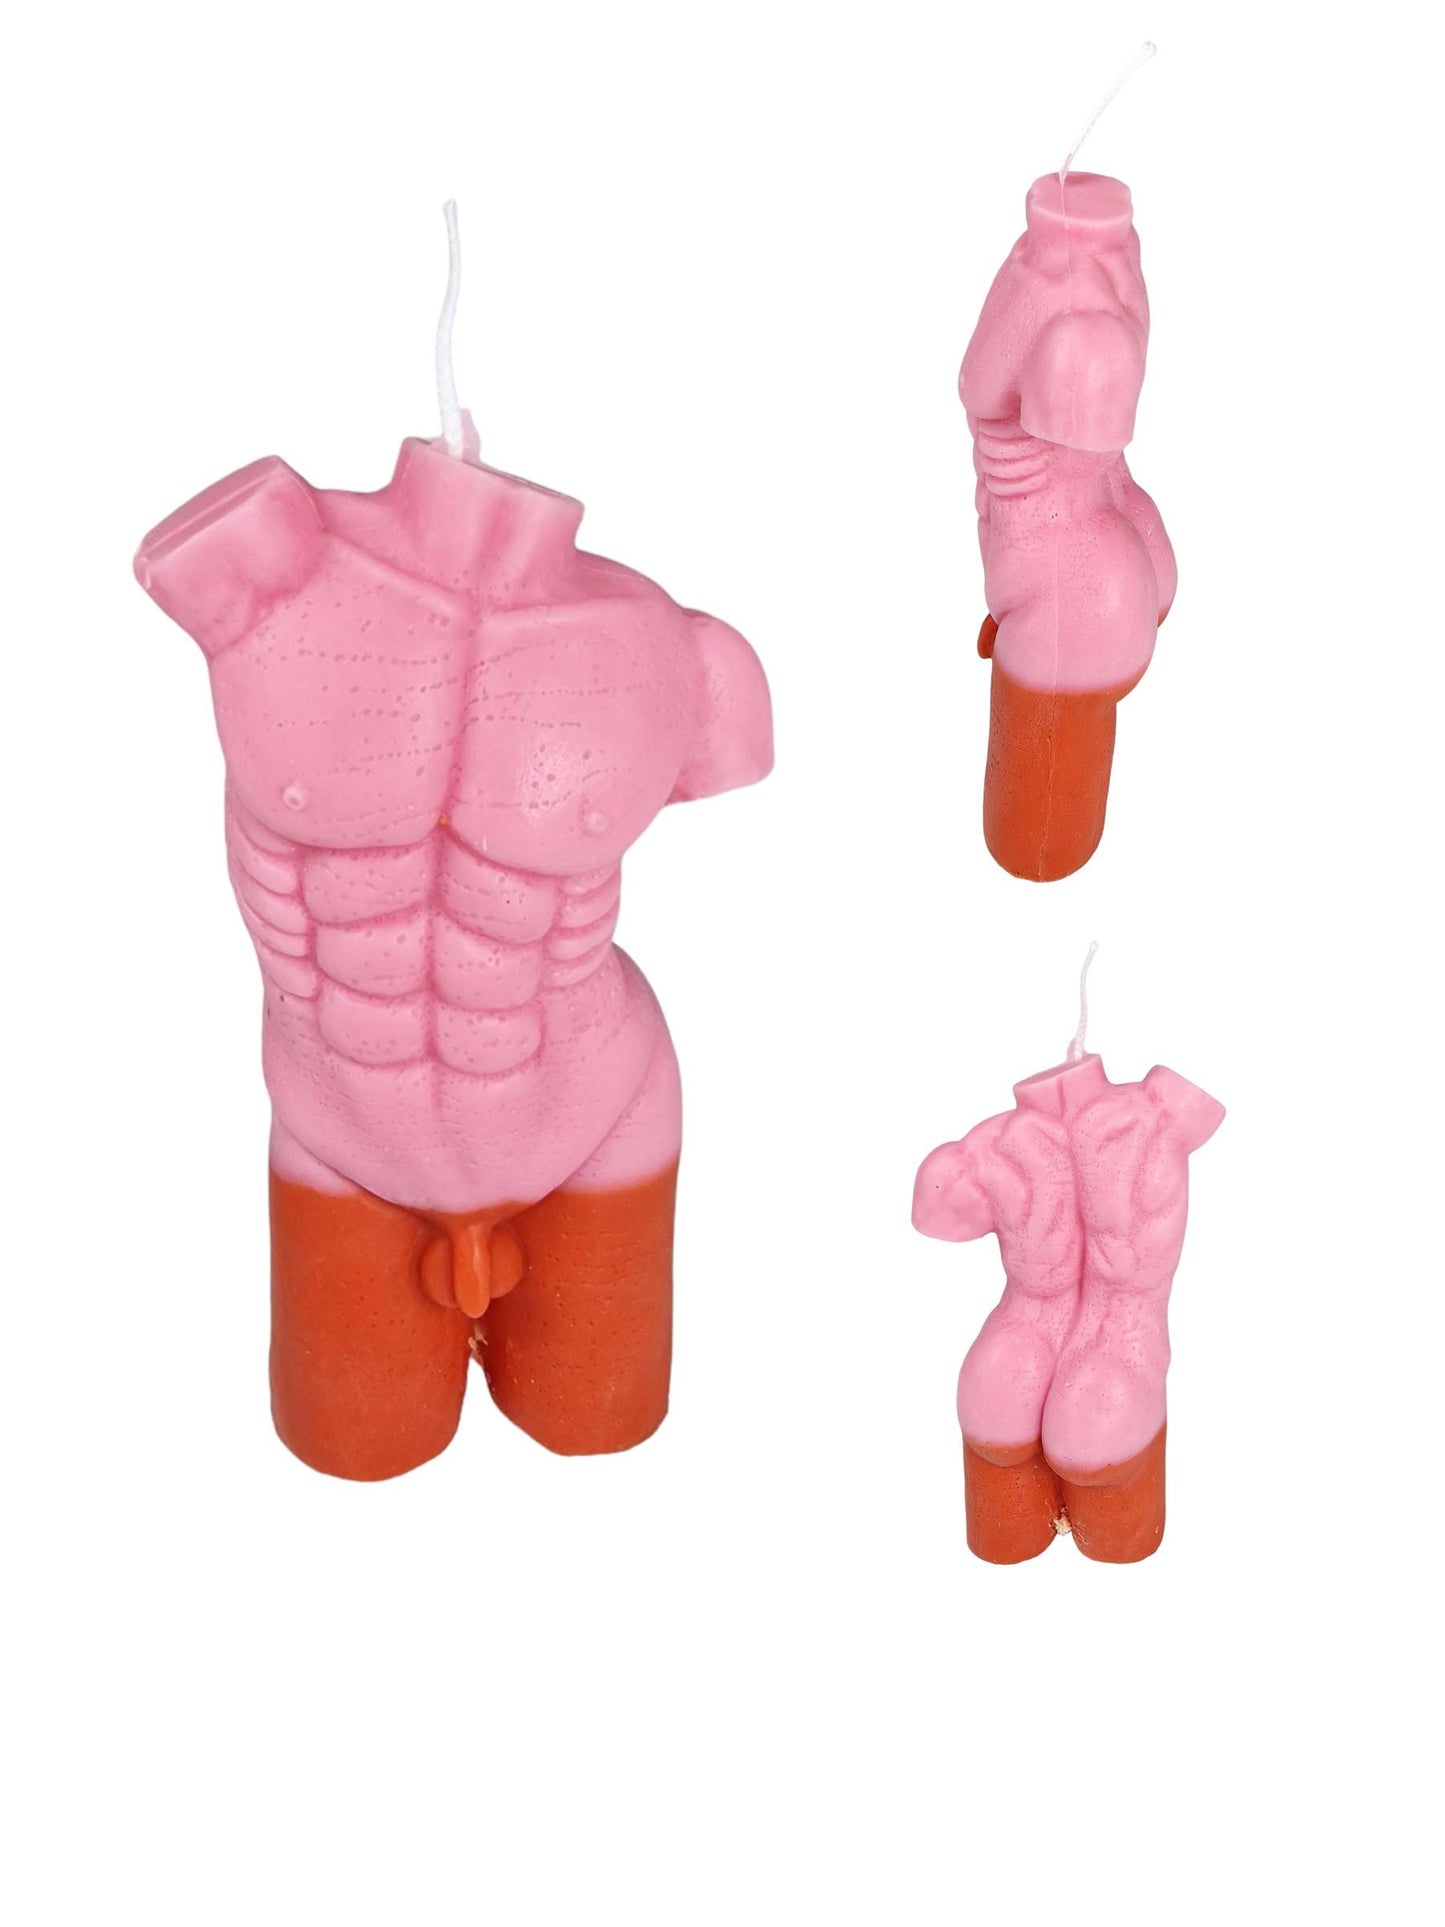 Fun and different light in the shape of a man's torso. Available in many colors